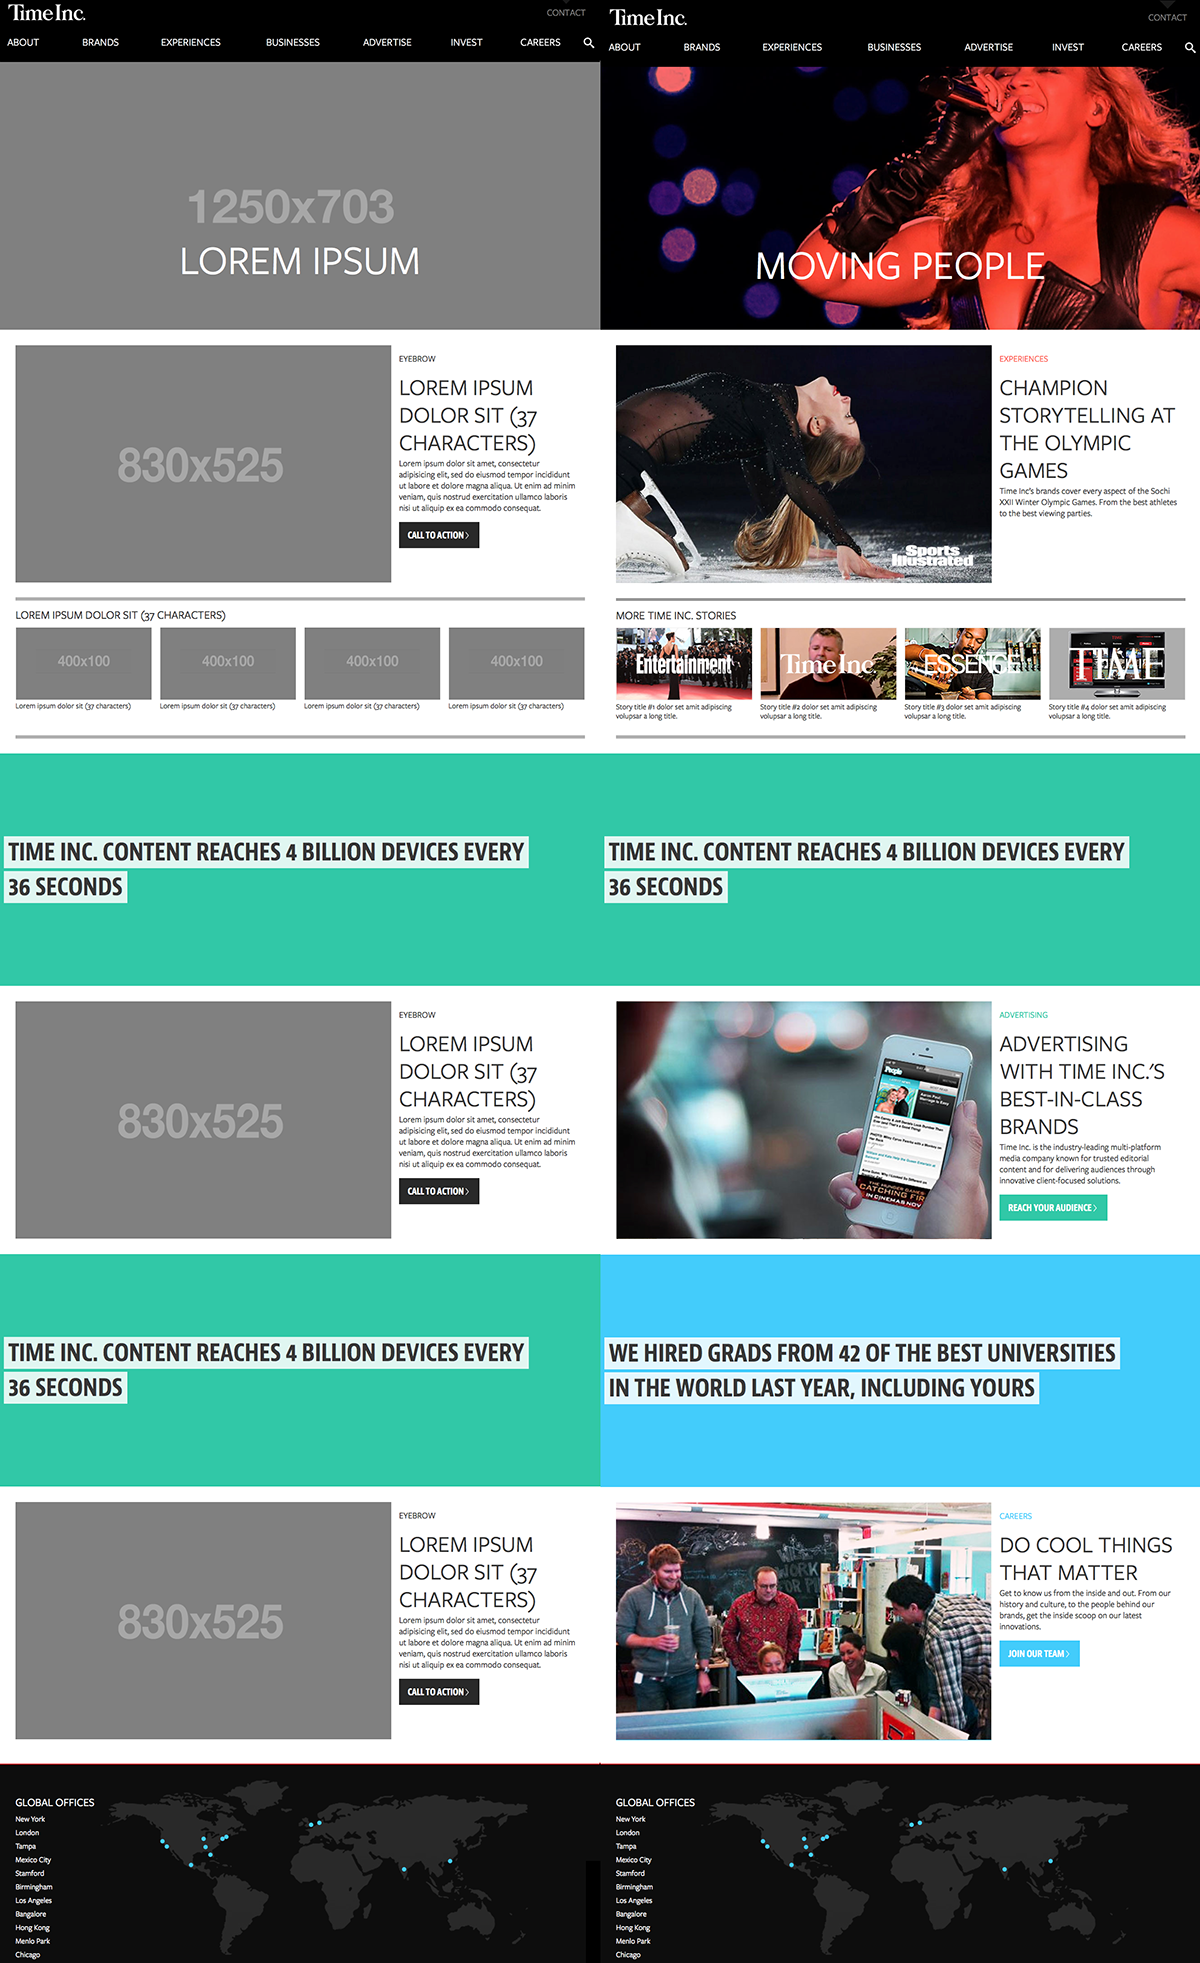 A side-by-side comparison of Time Inc.'s homepage template and page levels. The template articulates the content structure of the design system, while the page shows what the system looks like with real content displayed by it.